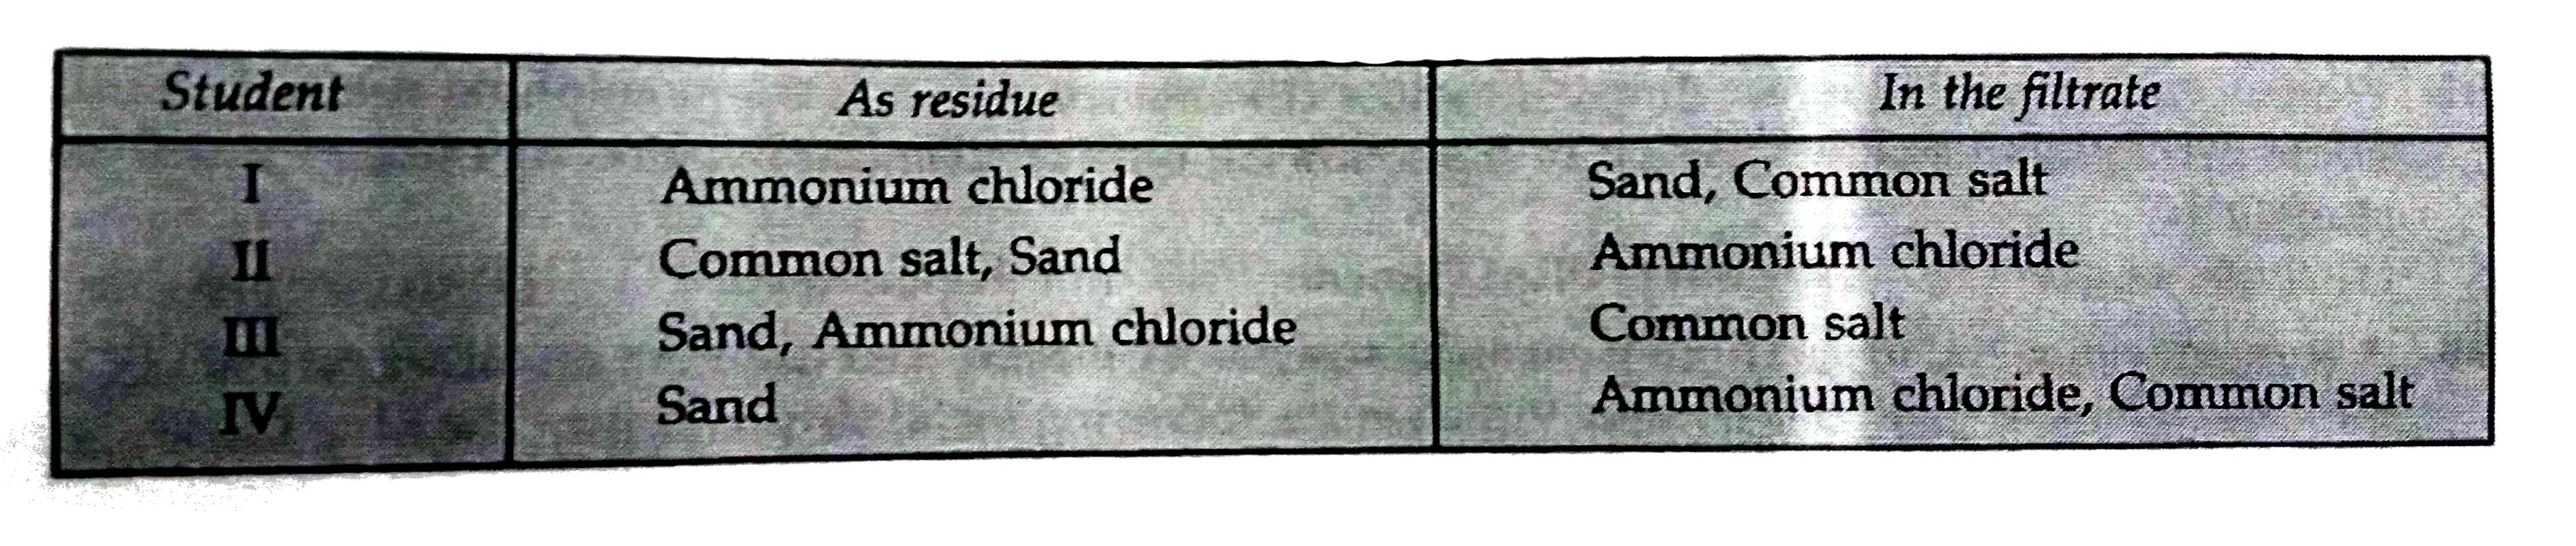 Four students took separately the mixture of sand, common salt and ammonium cloride in beakers, added water, stirred the mixture well and then filtered. They reported their observations as shown below      Who reported the observations in the correct order of the components as residue and in the filtrate ?